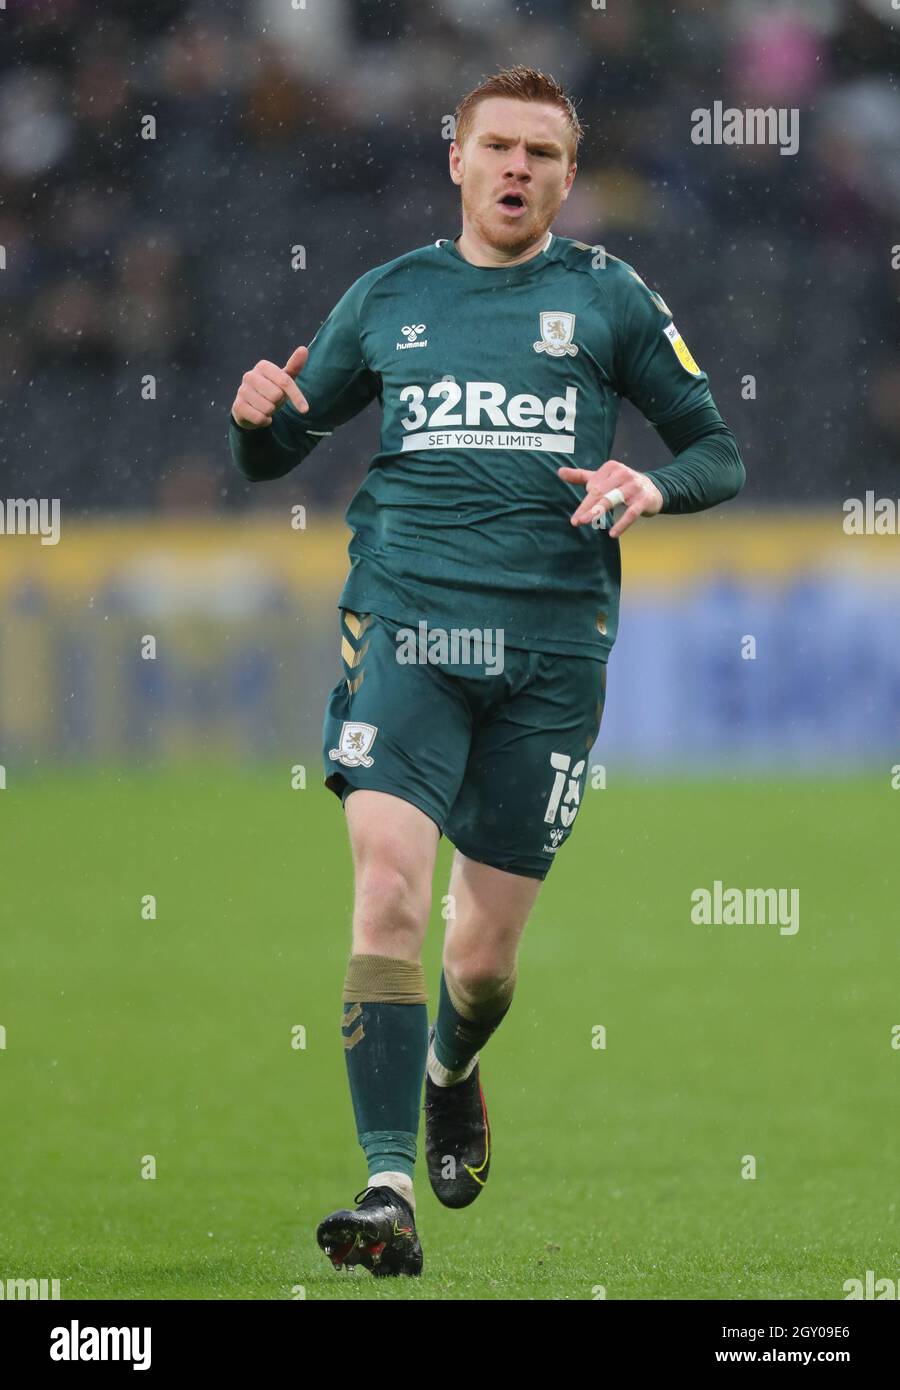 DUNCAN WATMORE, MIDDLESBROUGH FC, 2021 Stock Photo